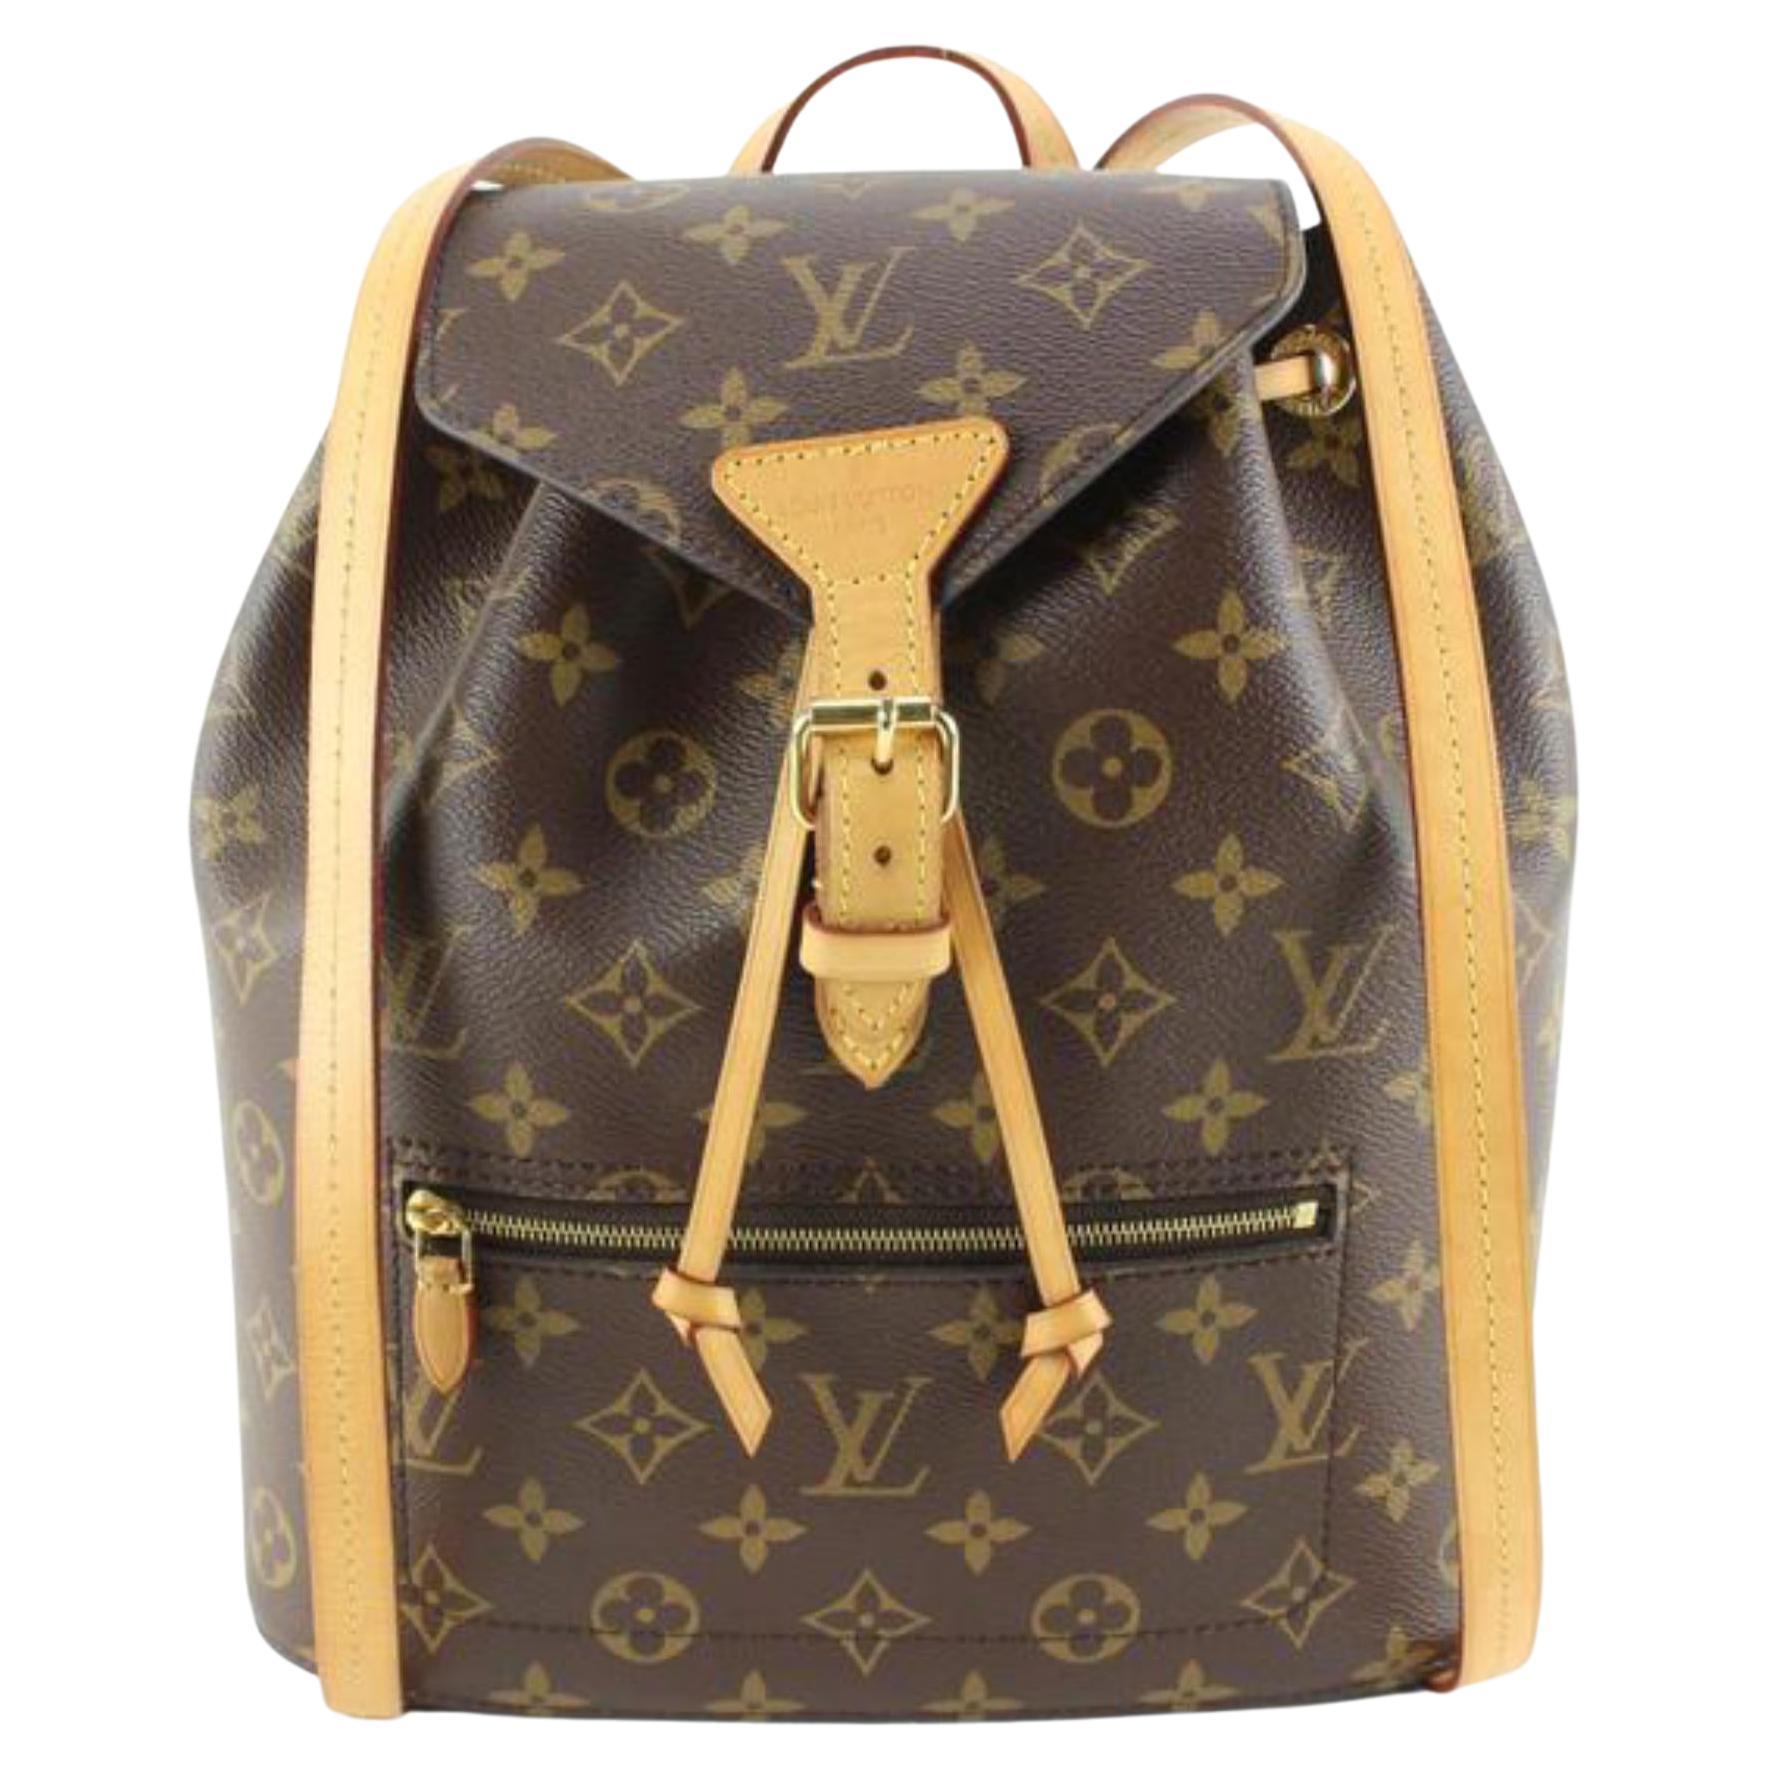 New in Box Louis Vuitton Tricolor Lockme Backpack